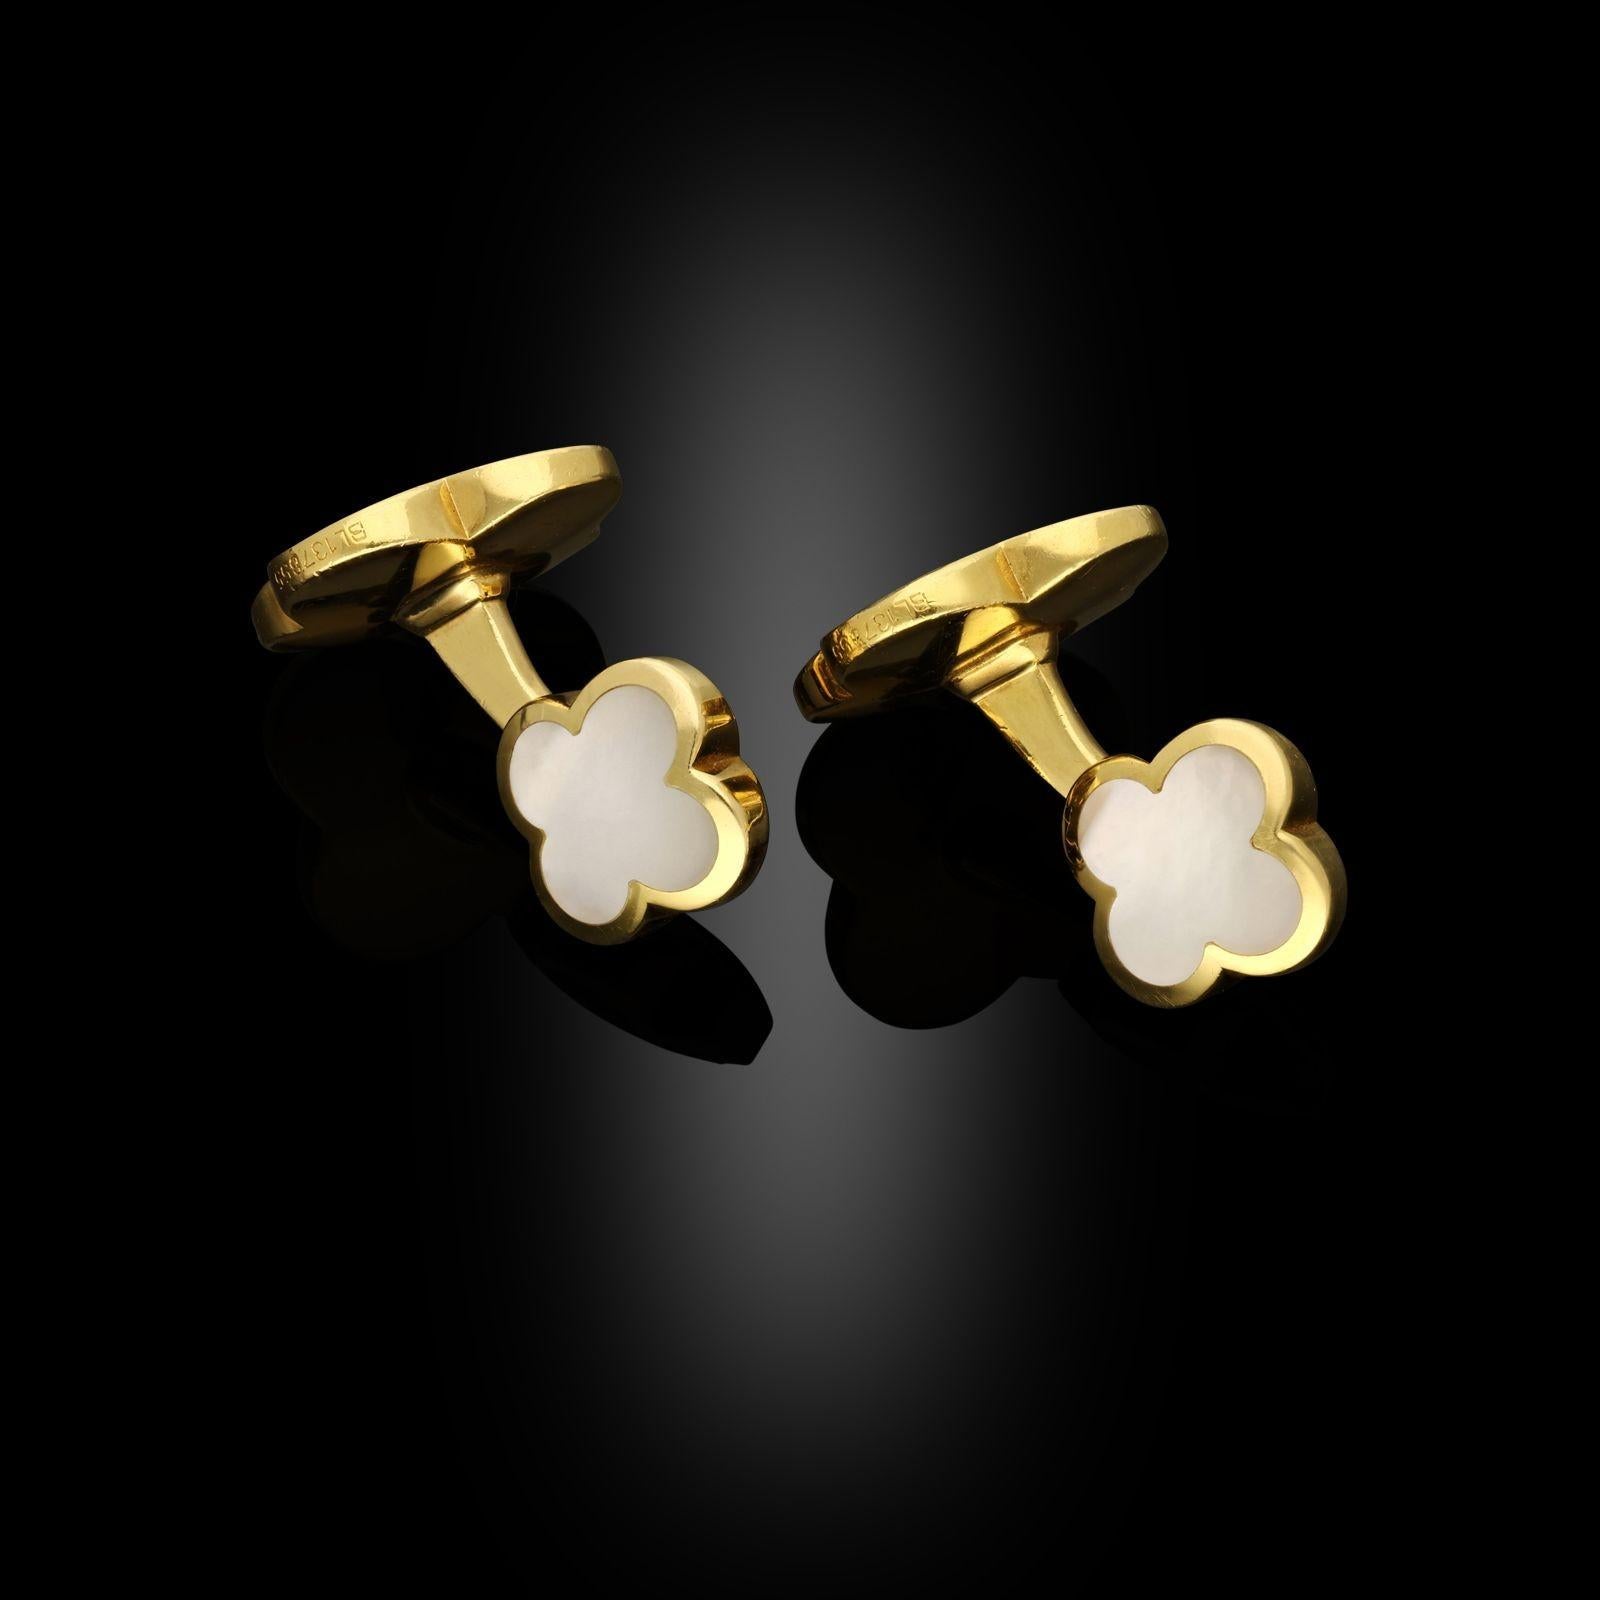 A chic pair of 18ct gold and mother of pearl ‘Alhambra’ cufflinks by Van Cleef & Arpels c.2010, the double ended cufflinks with one large and one smaller head, both formed of the iconic Alhambra quatrefoil clover motif in carved and polished mother